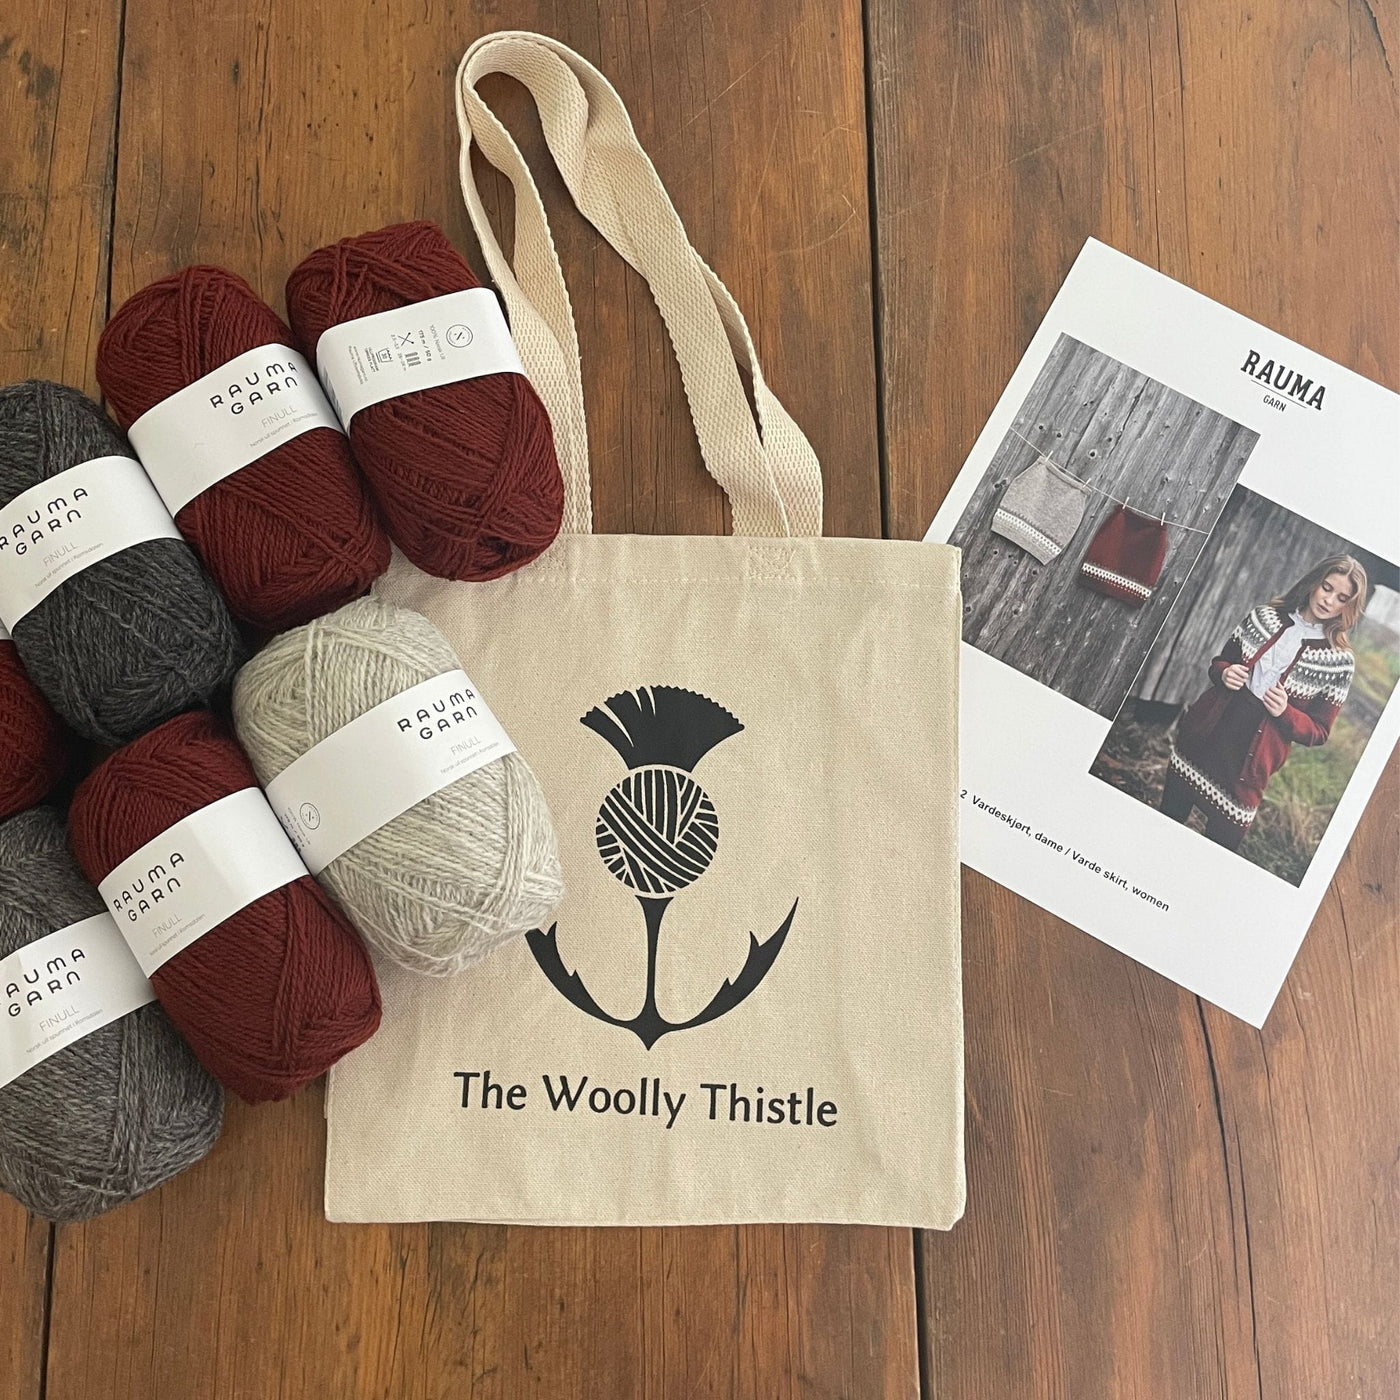 Components of the Varde Skirt Kit including pattern card, TWT Tote, and Rauma Finullgarn yarn in Burgundy and greys.